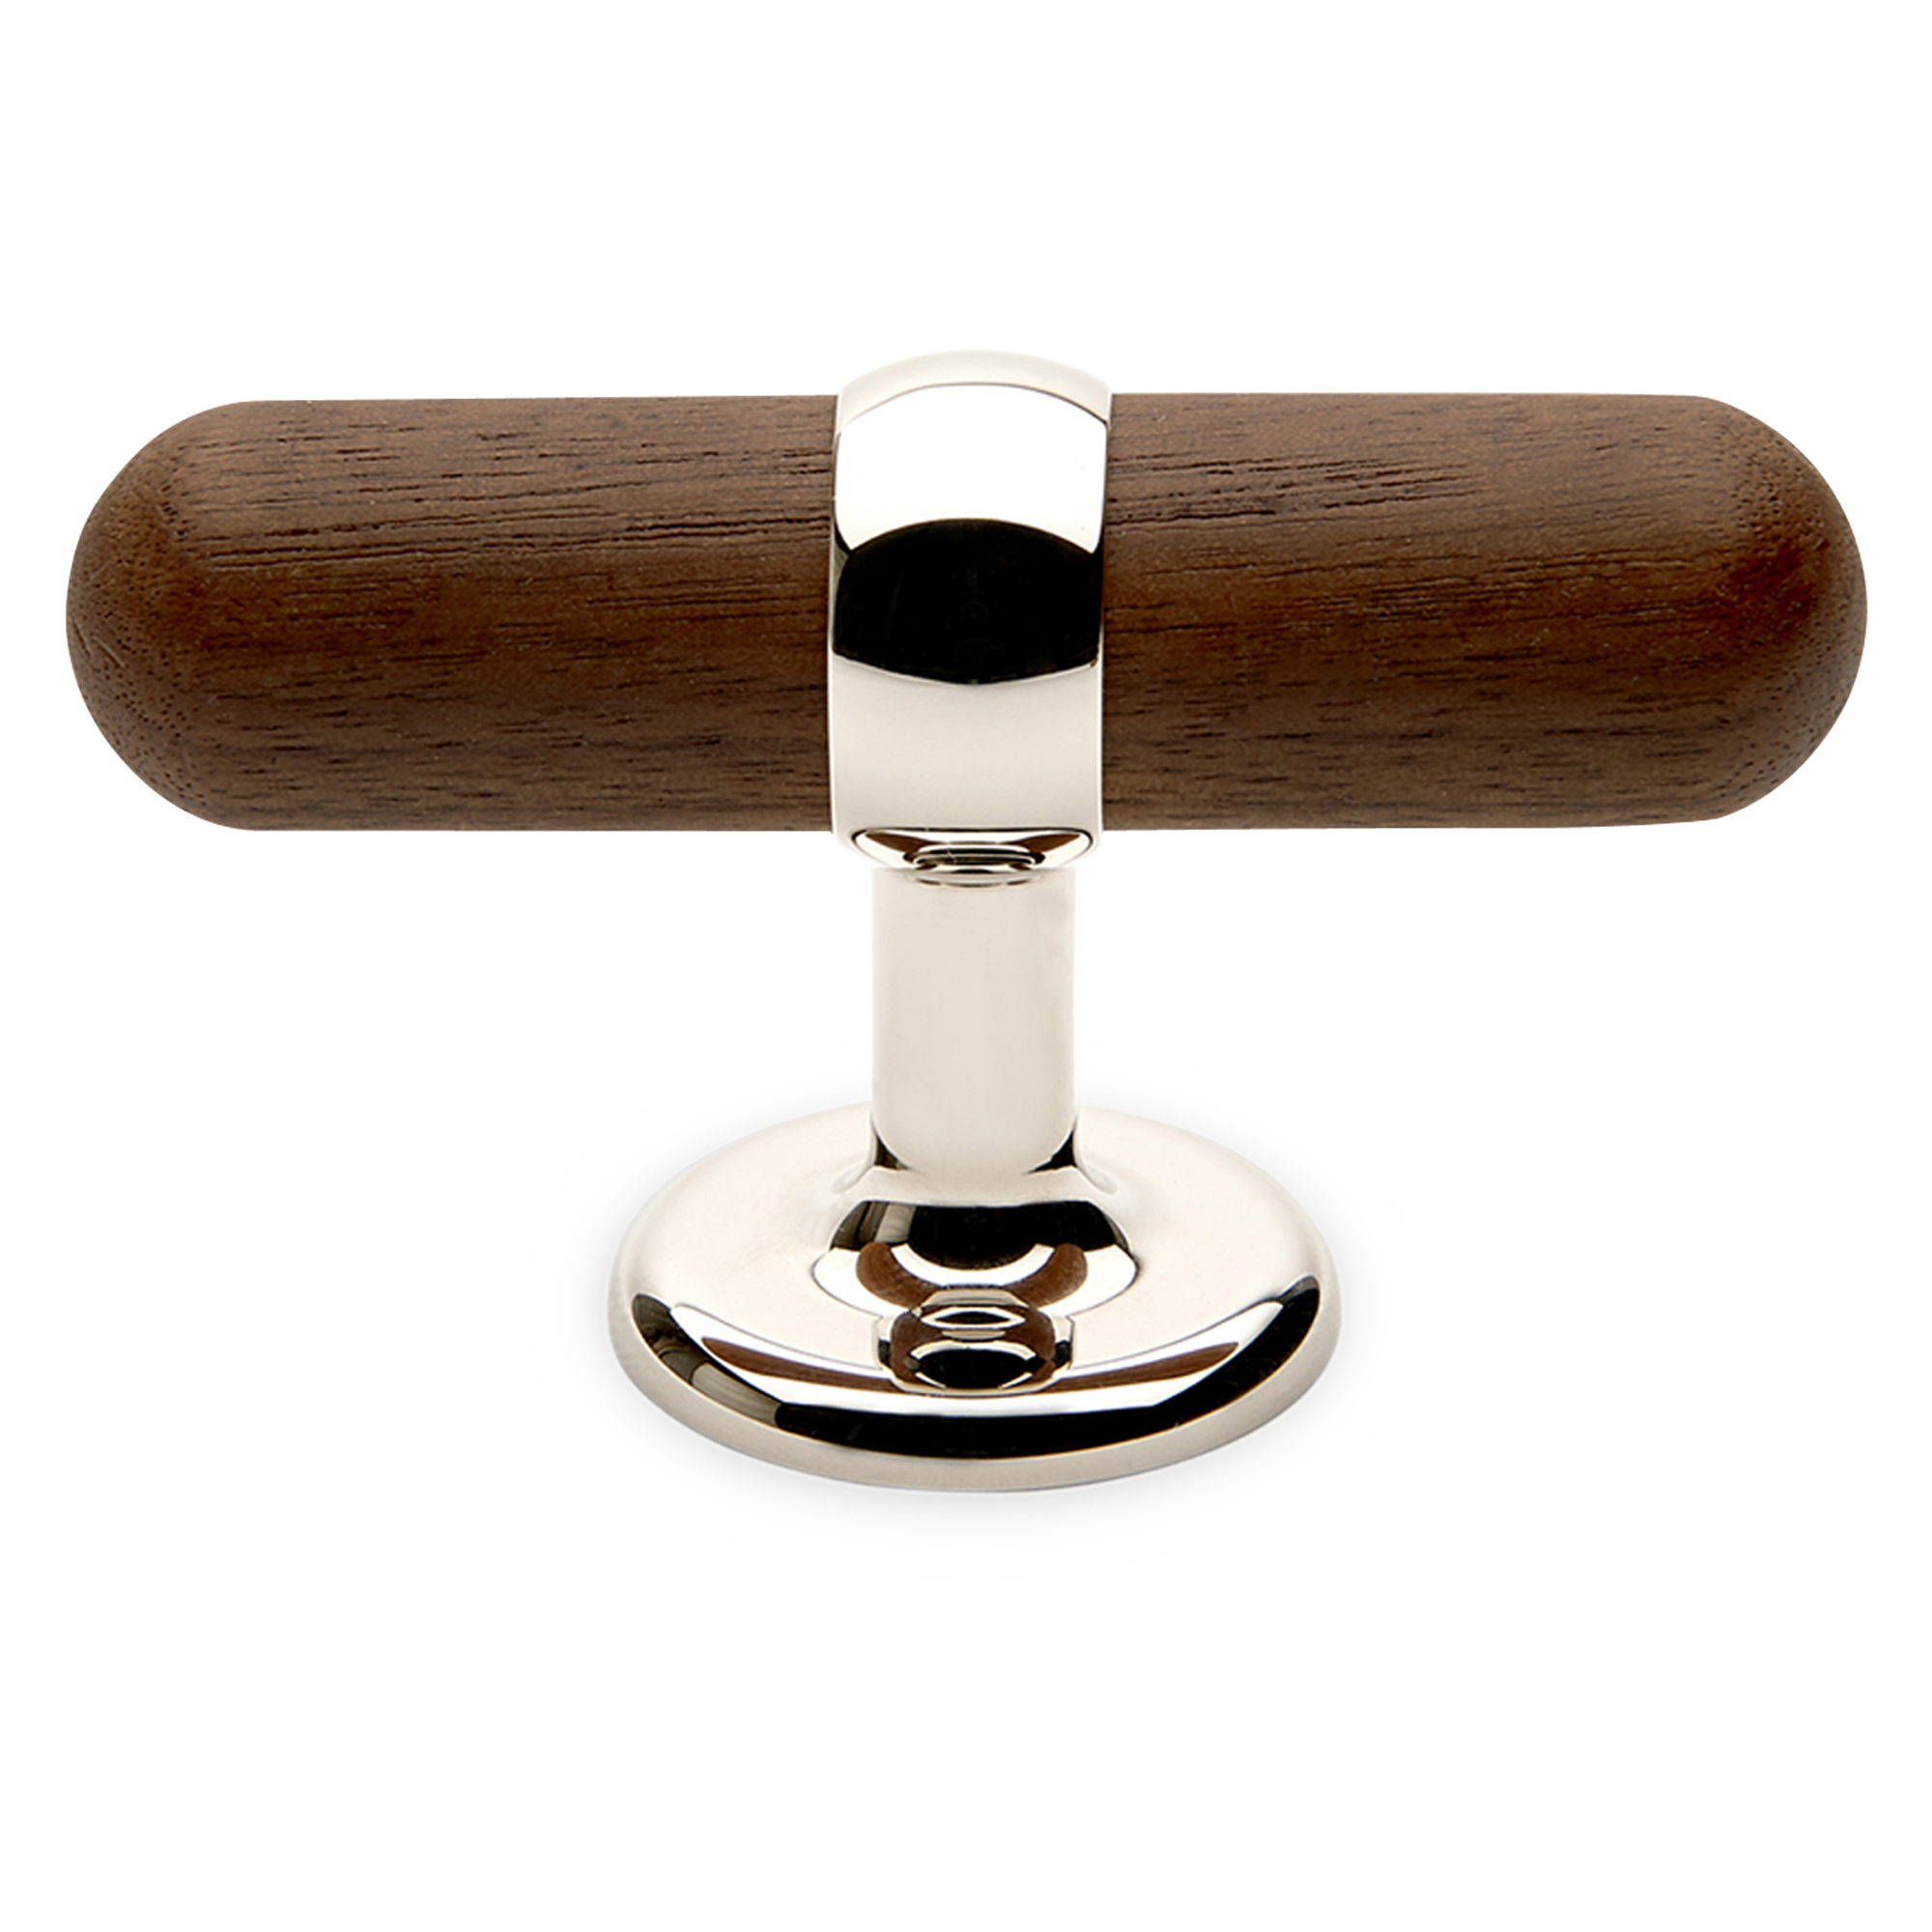 The Stockton family of pulls combines hand-finished solid brass and solid walnut for a mid-twentieth century modern feel.